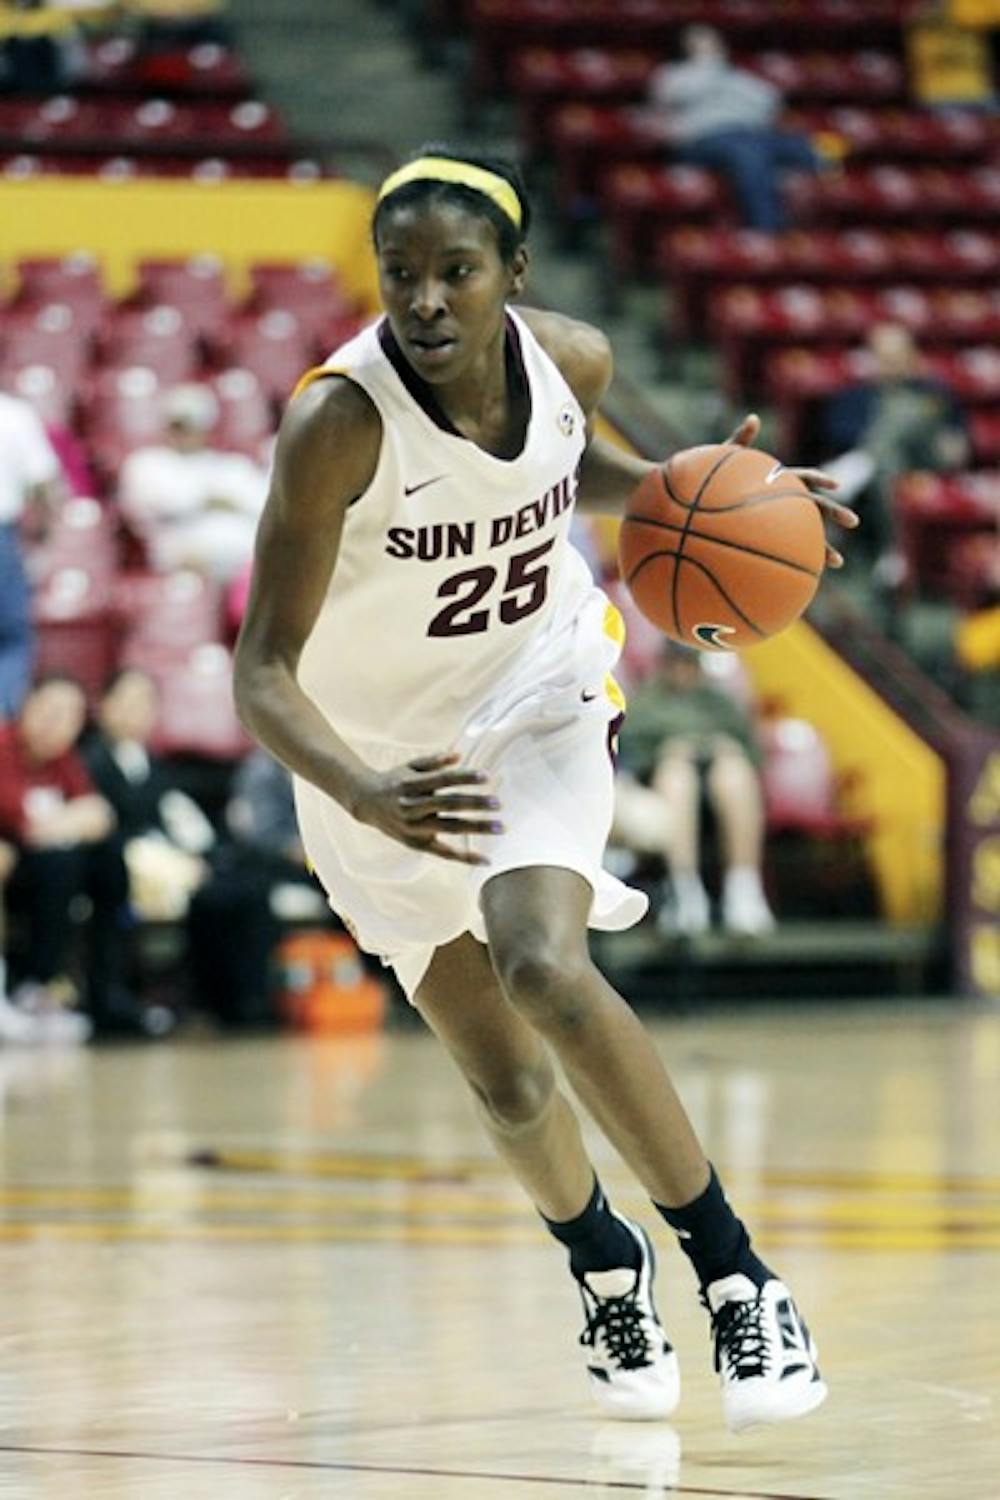 Kimberly Brandon dribbles the ball up the court in a game against Stanford on Feb. 2. Brandon is one of five Sun Devils playing their final games at Wells Fargo Arena this weekend. (Photo by Sam Rosenbaum)